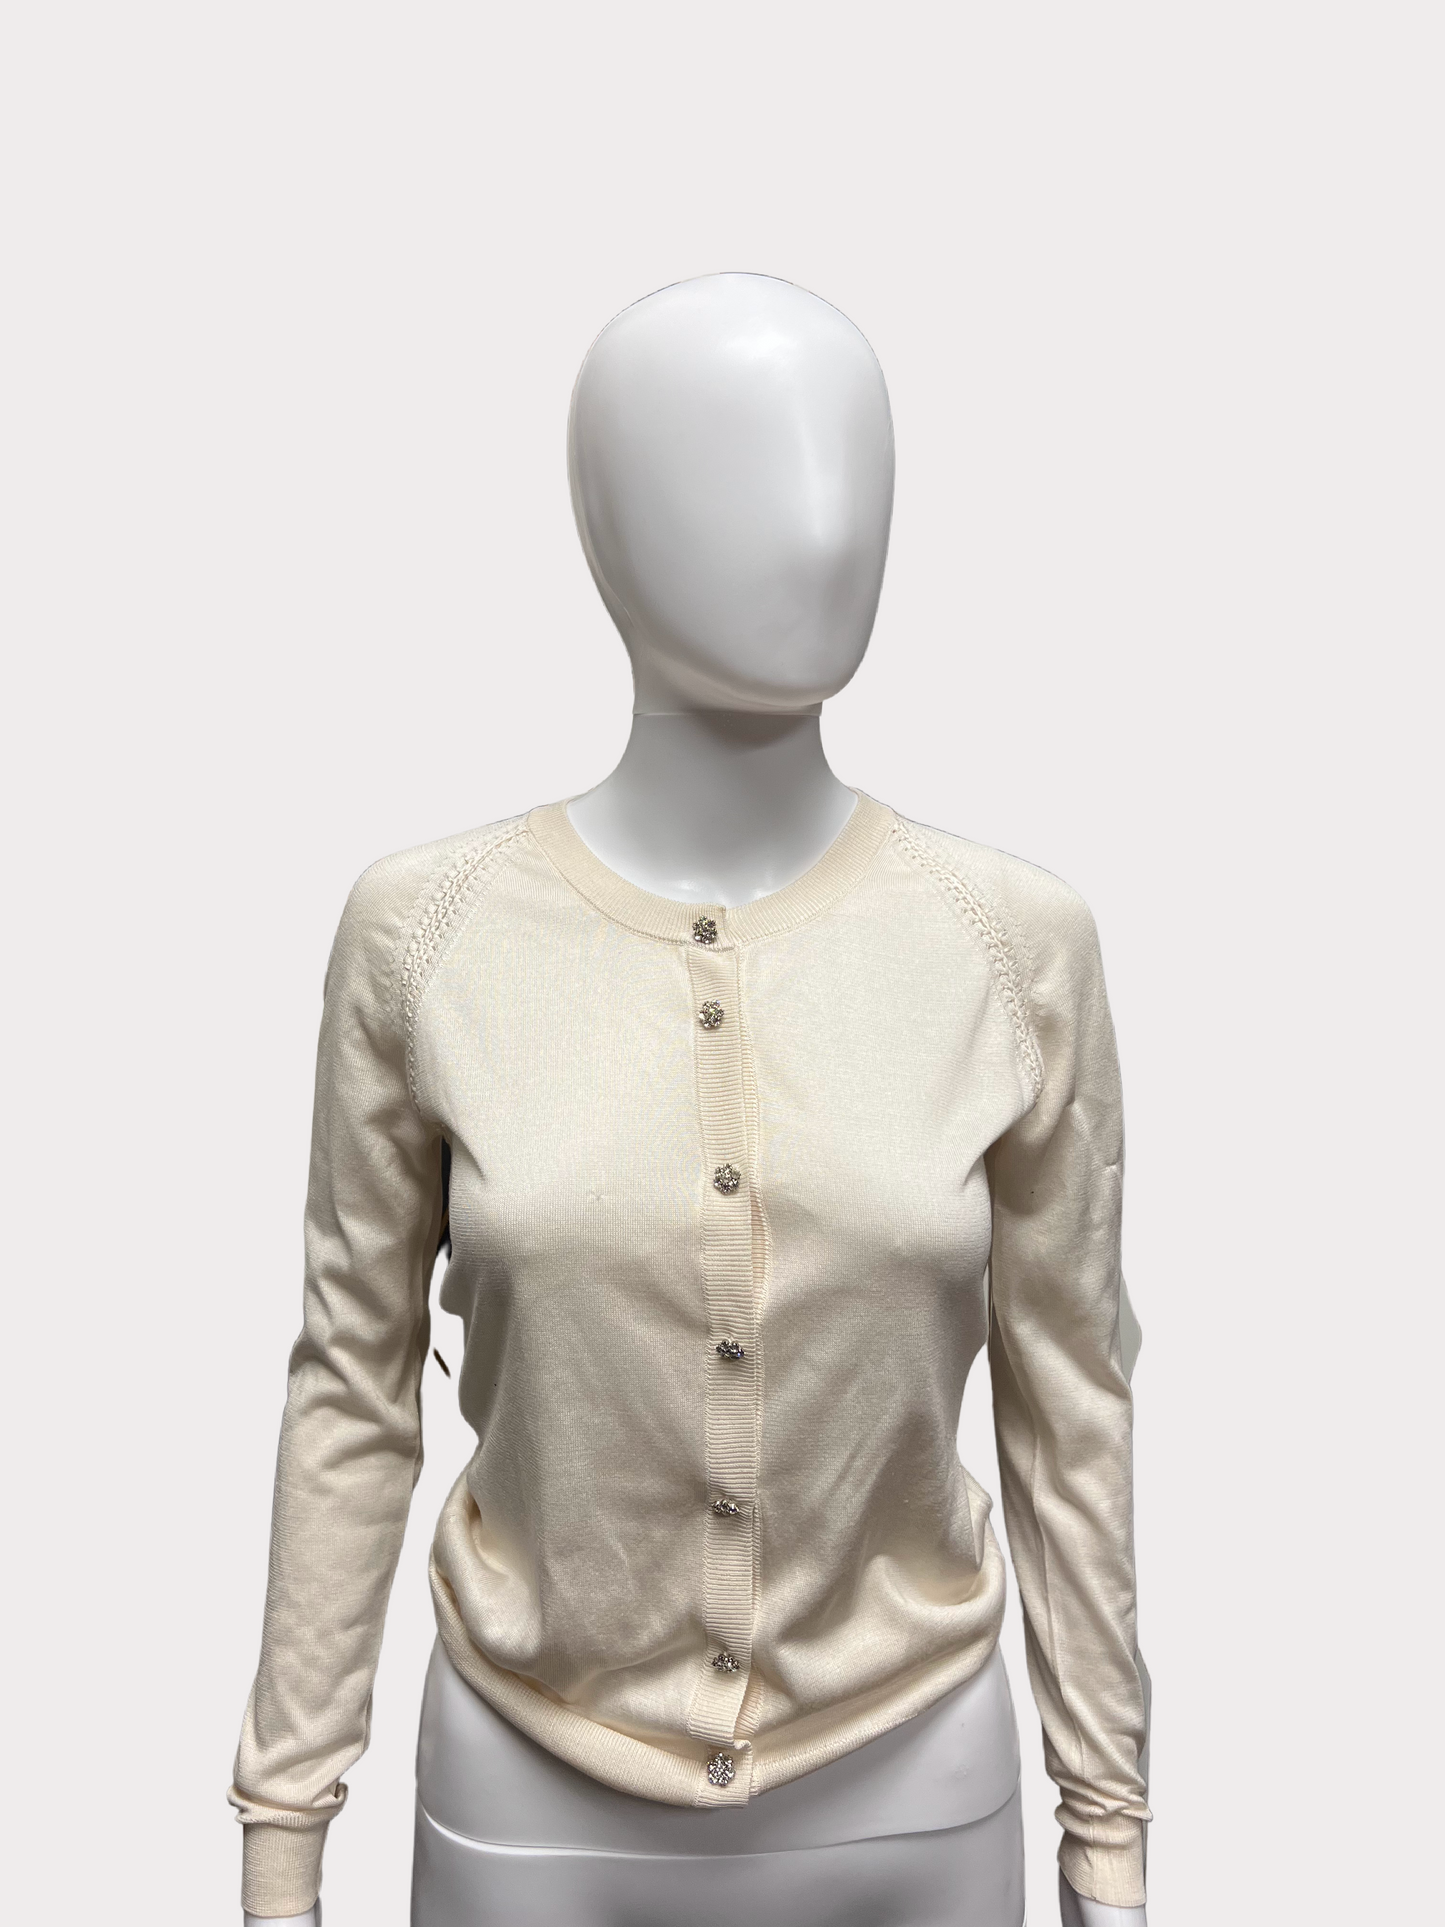 Dolce & Gabbana - White Long Sleeve Cardigan w/ Embellished Buttons